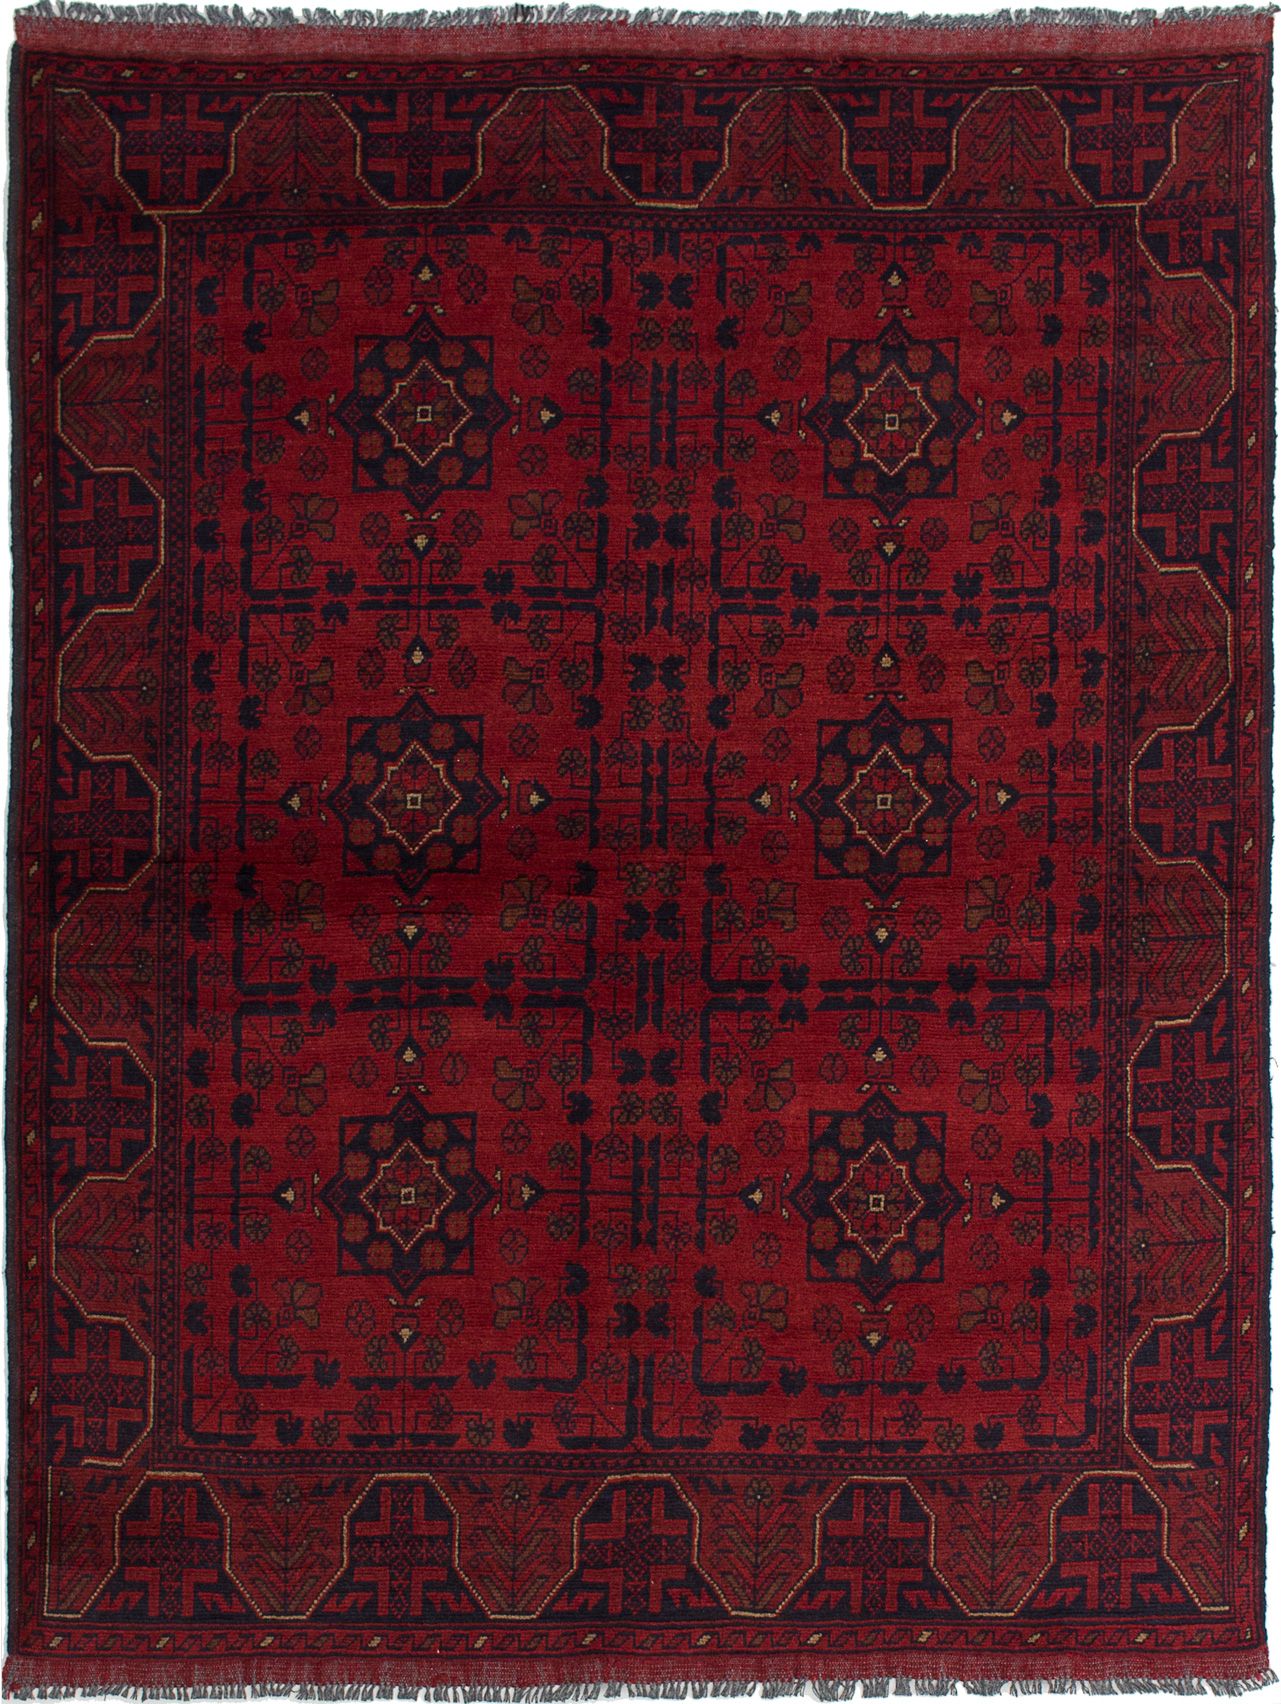 Hand-knotted Finest Khal Mohammadi Red Wool Rug 5'0" x 6'6"  Size: 5'0" x 6'6"  